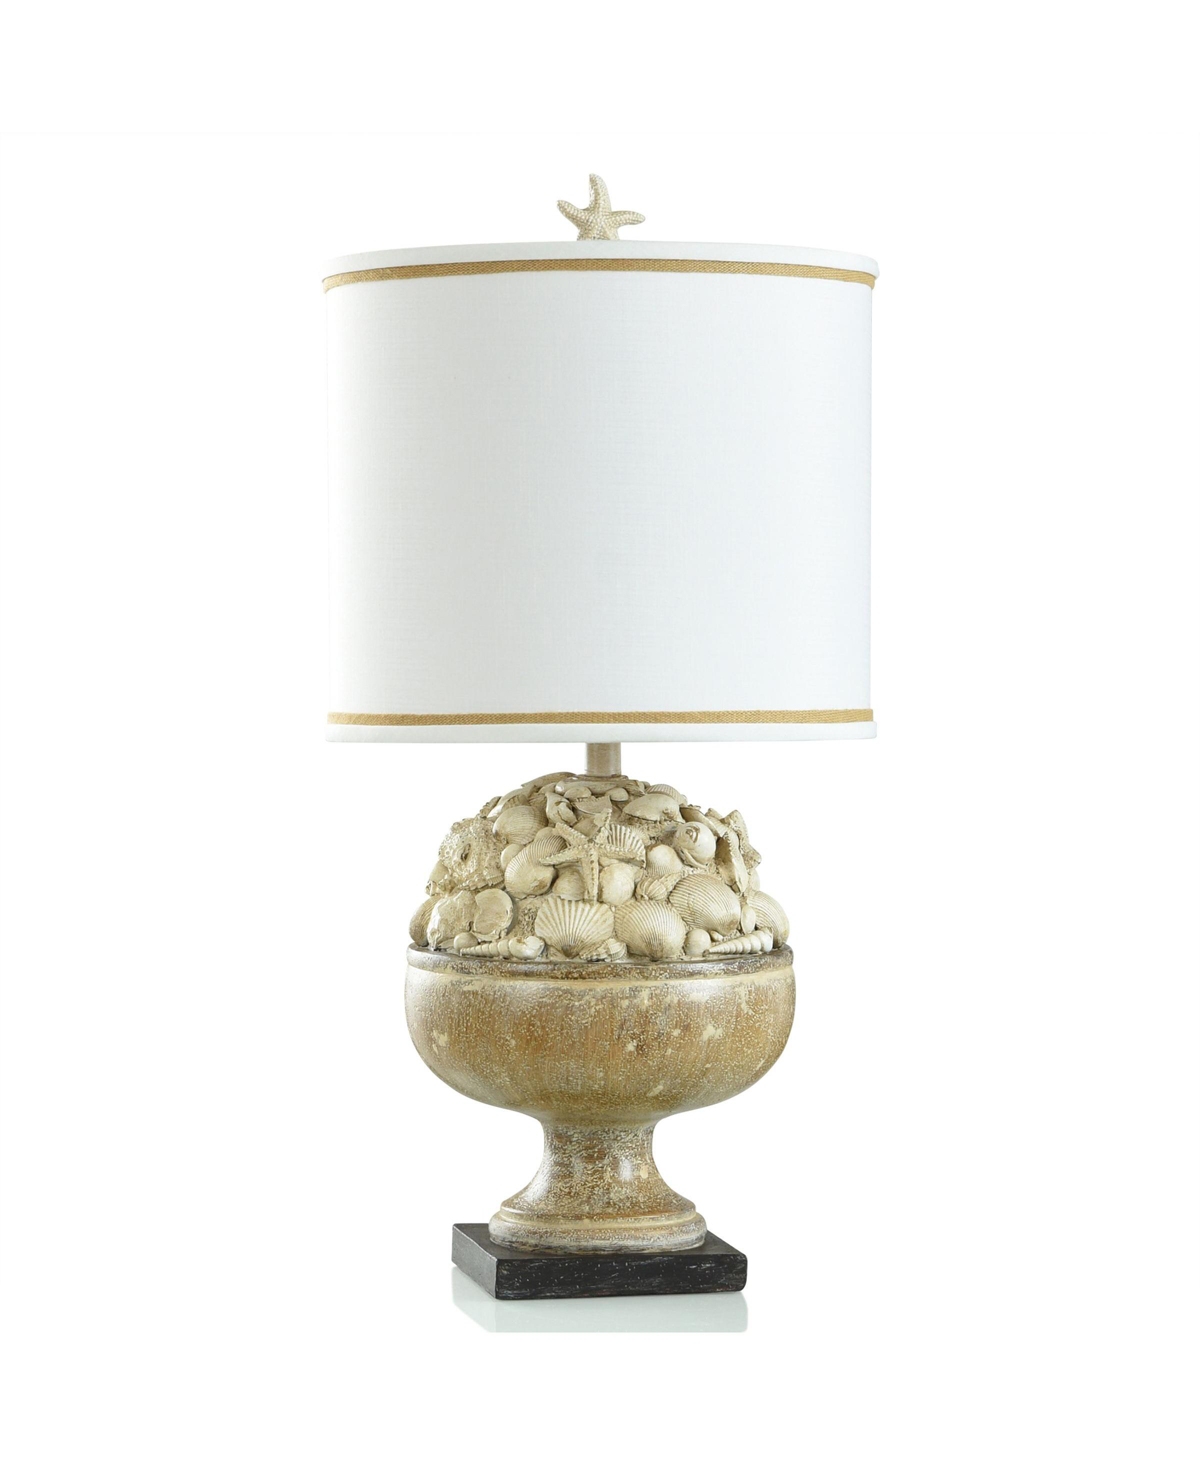 Stylecraft Home Collection 31" Shores Coastal Sand And Seashell Motif Table Lamp In Distressed Beige And Brown